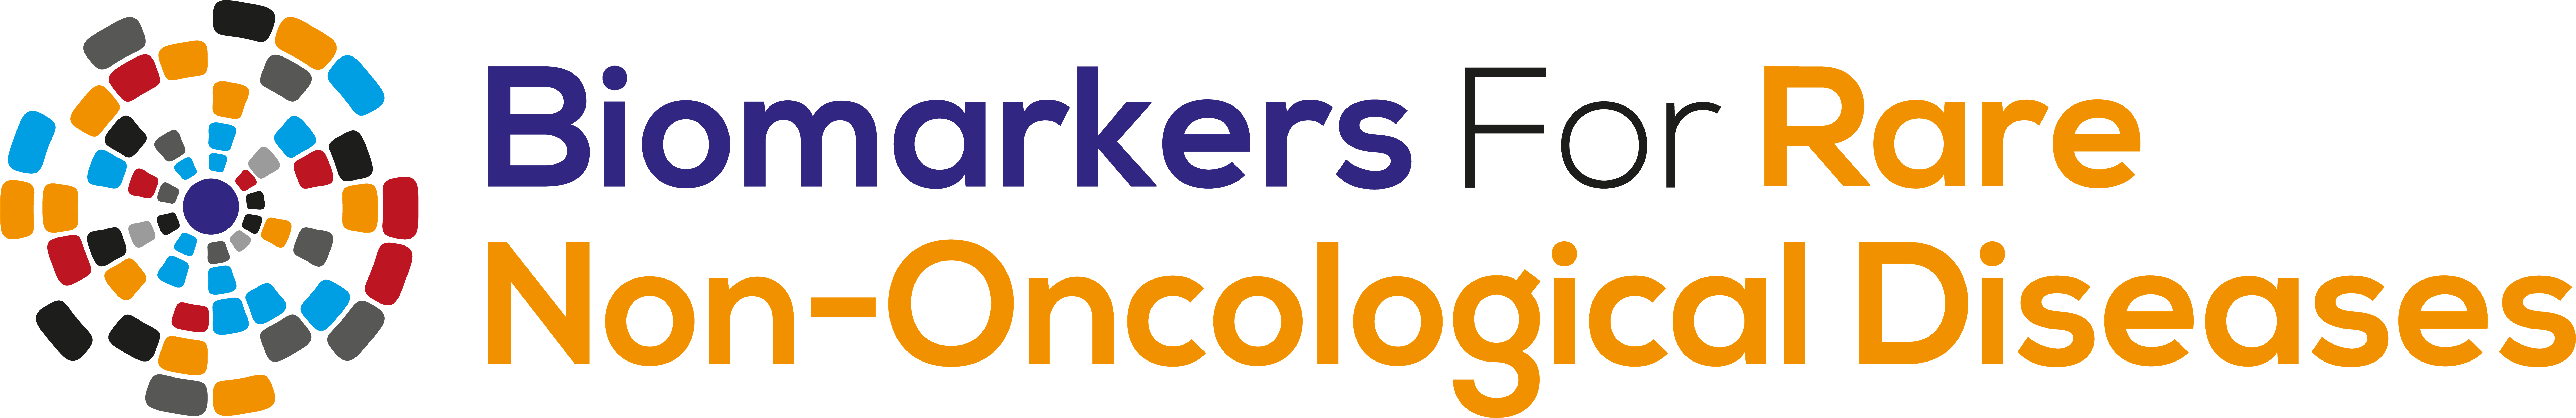 HW200124 Biomarkers for Rare Non-Oncological Diseases logo FINAL